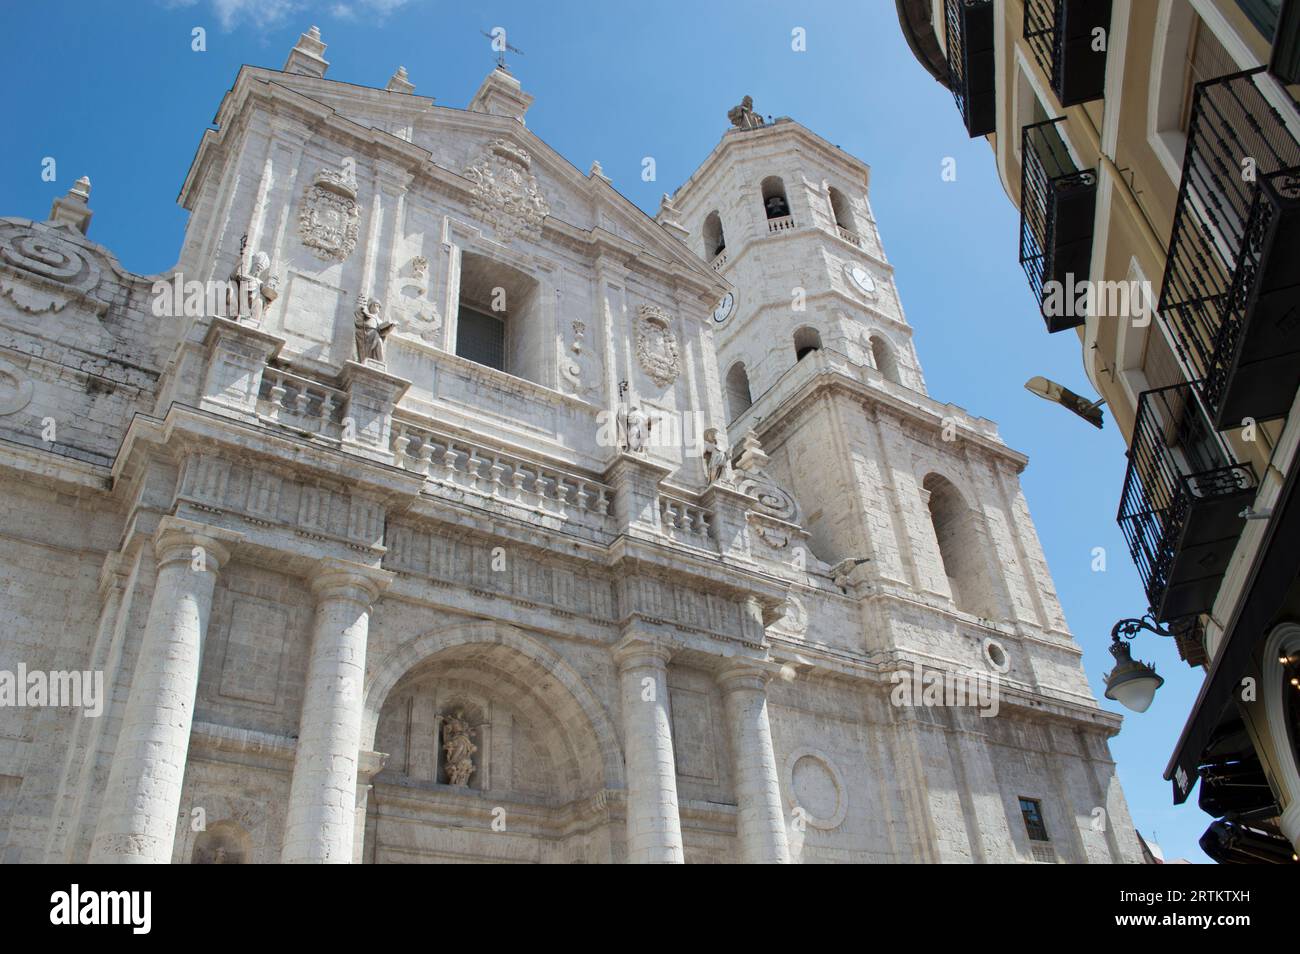 Facade of the Cathedral of Valladolid Stock Photo